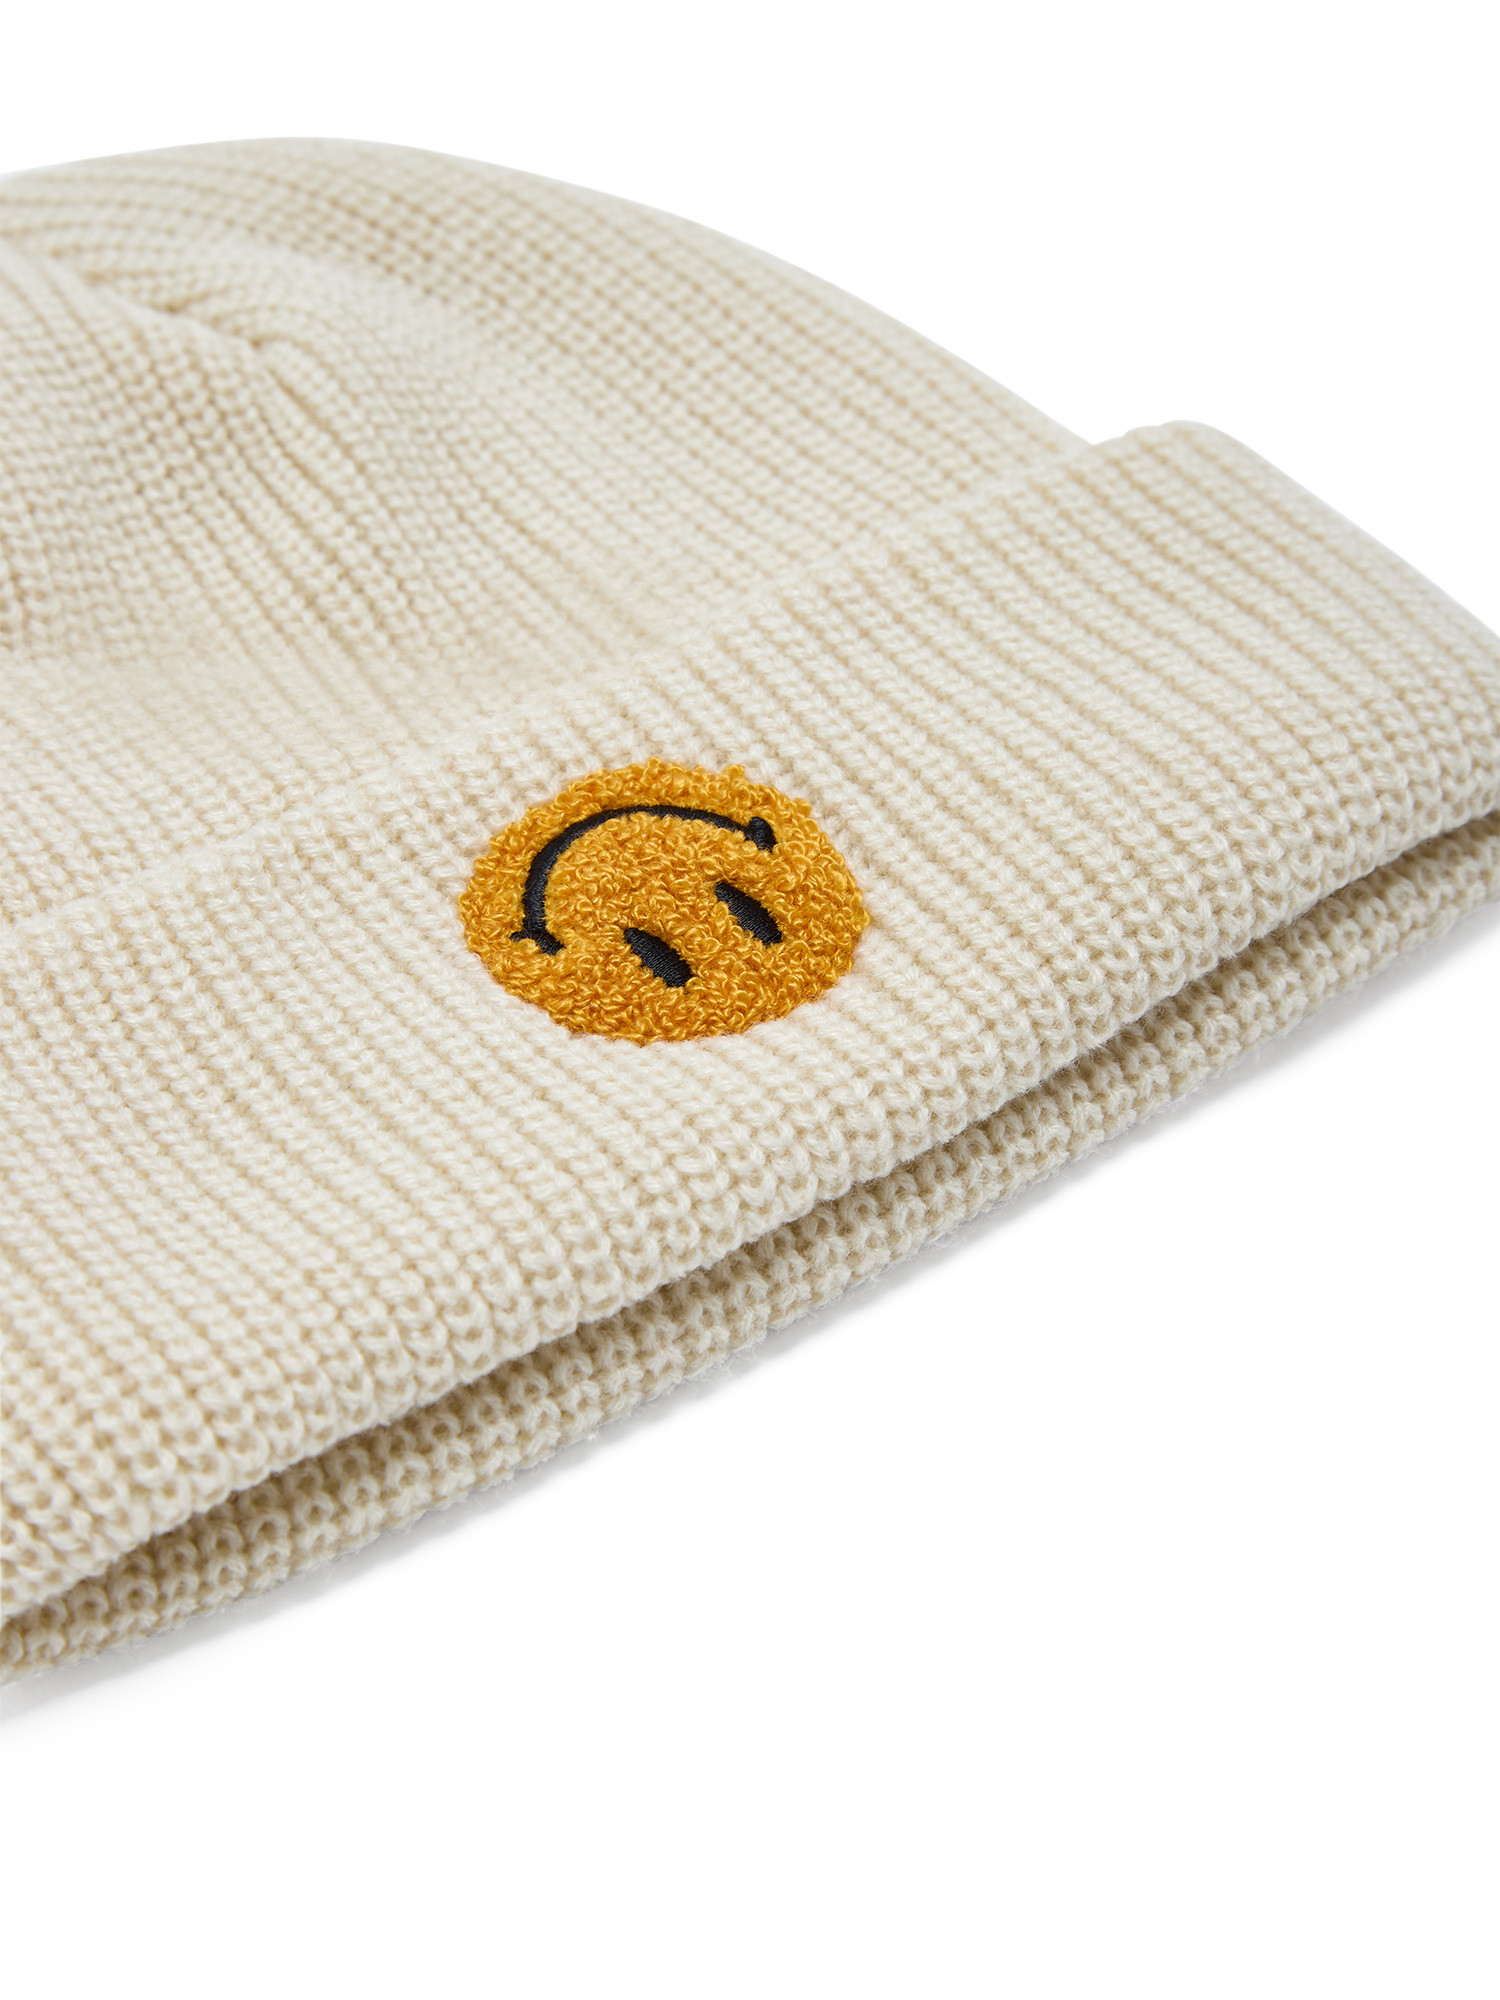 Market - Smiley® upside down beanie, Off White, large image number 1